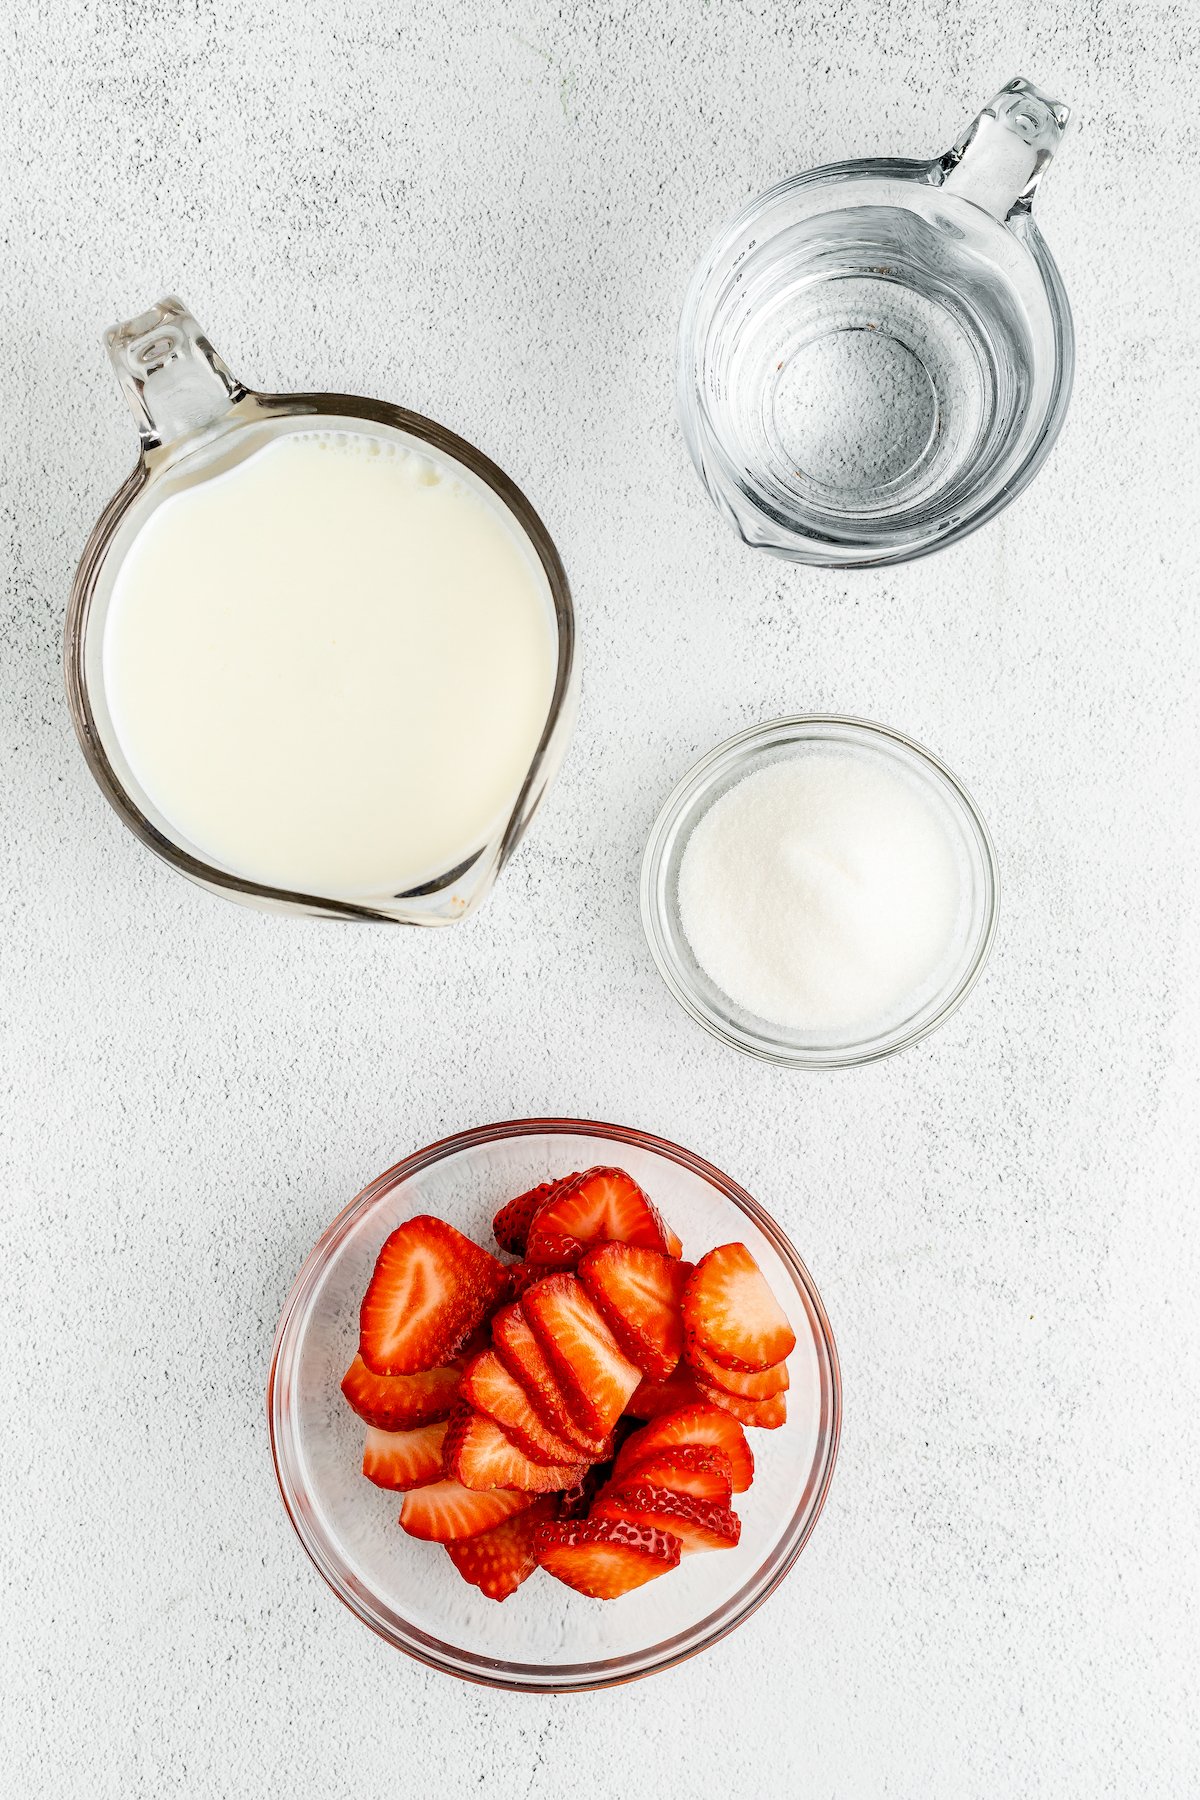 Milk, water, sugar, and sliced strawberries, on a white work surface.